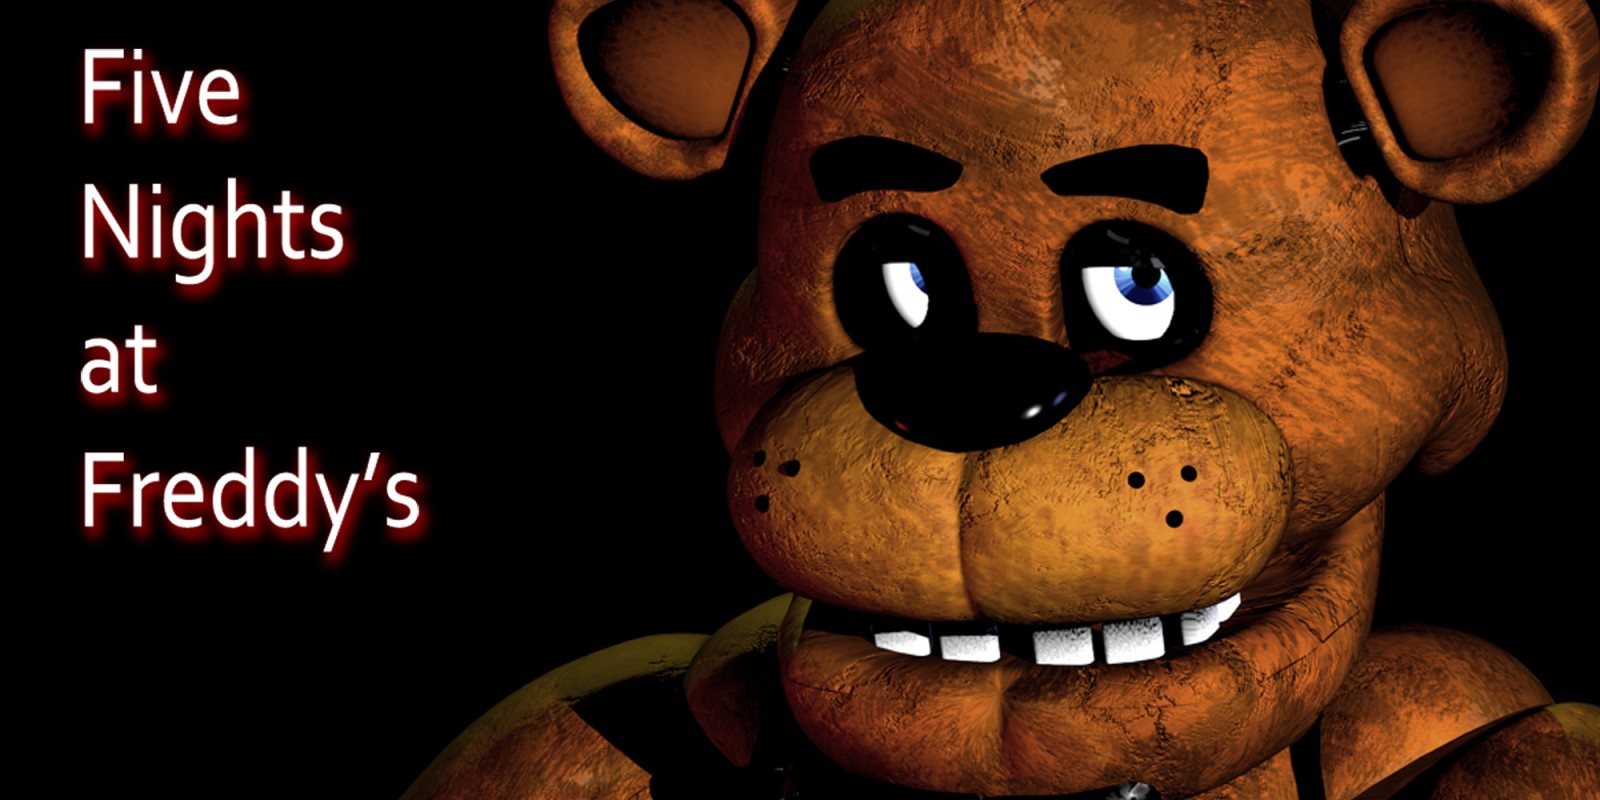 Five Nights at Freddy's | Nintendo Switch download software | Games - Five Nights At Freddy's Switch